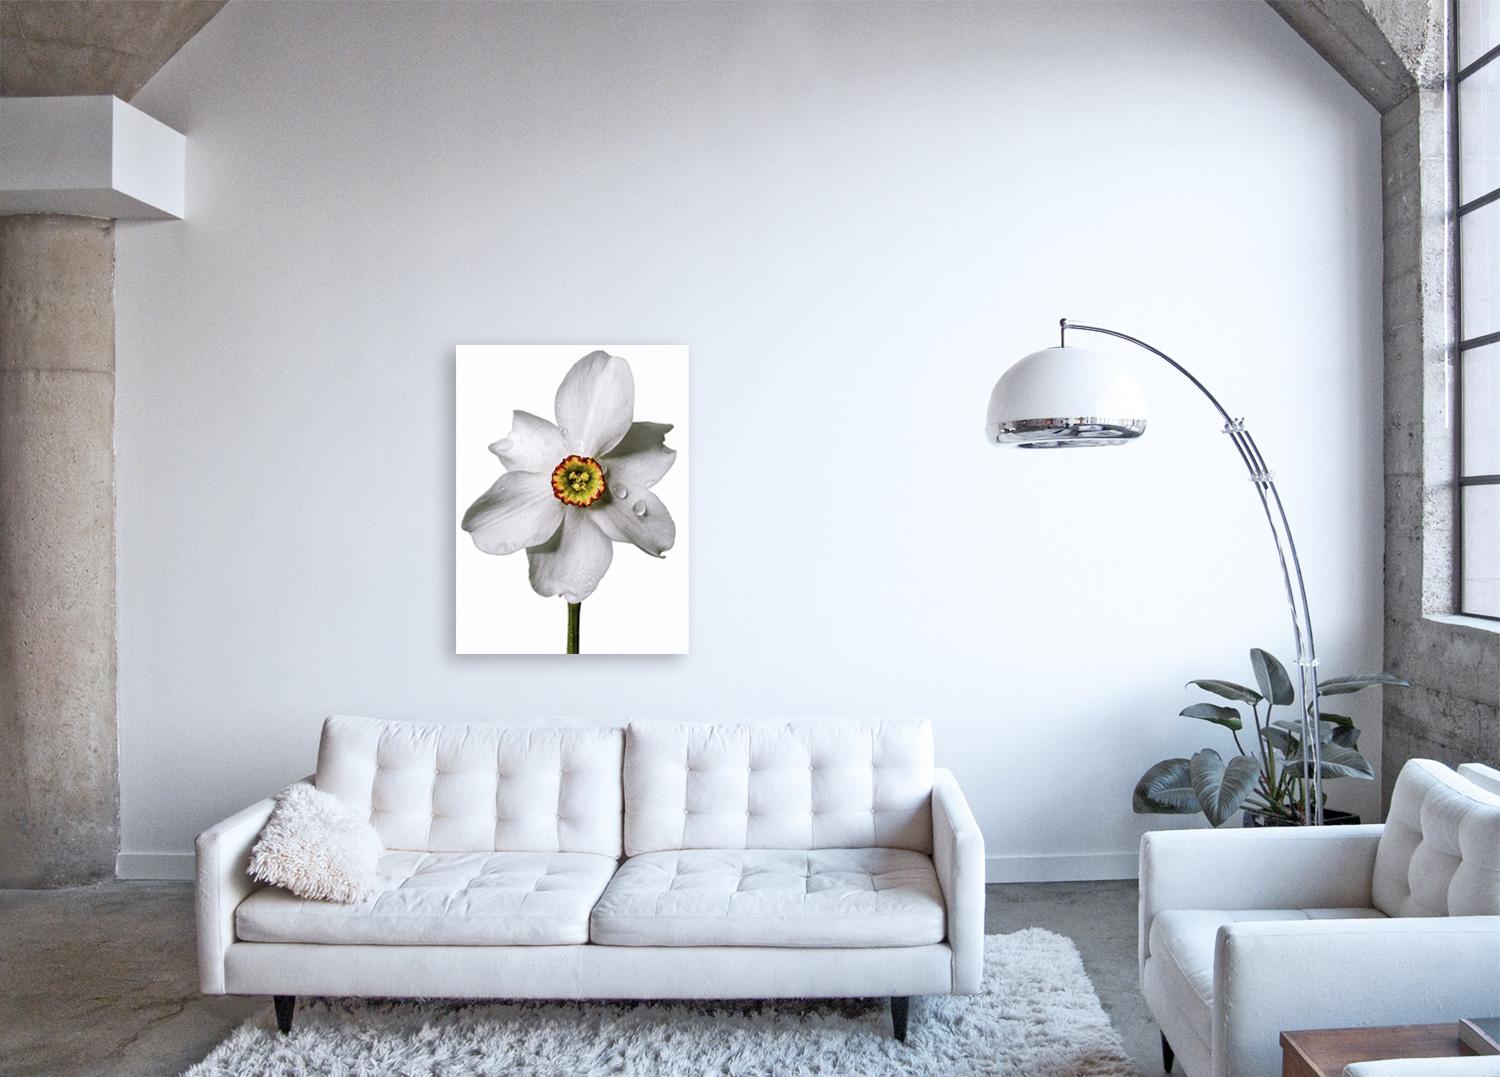 Flora Italiana ( Narcissus Poetic ) large format botanical still life photograph - Photograph by Linda Rosewall